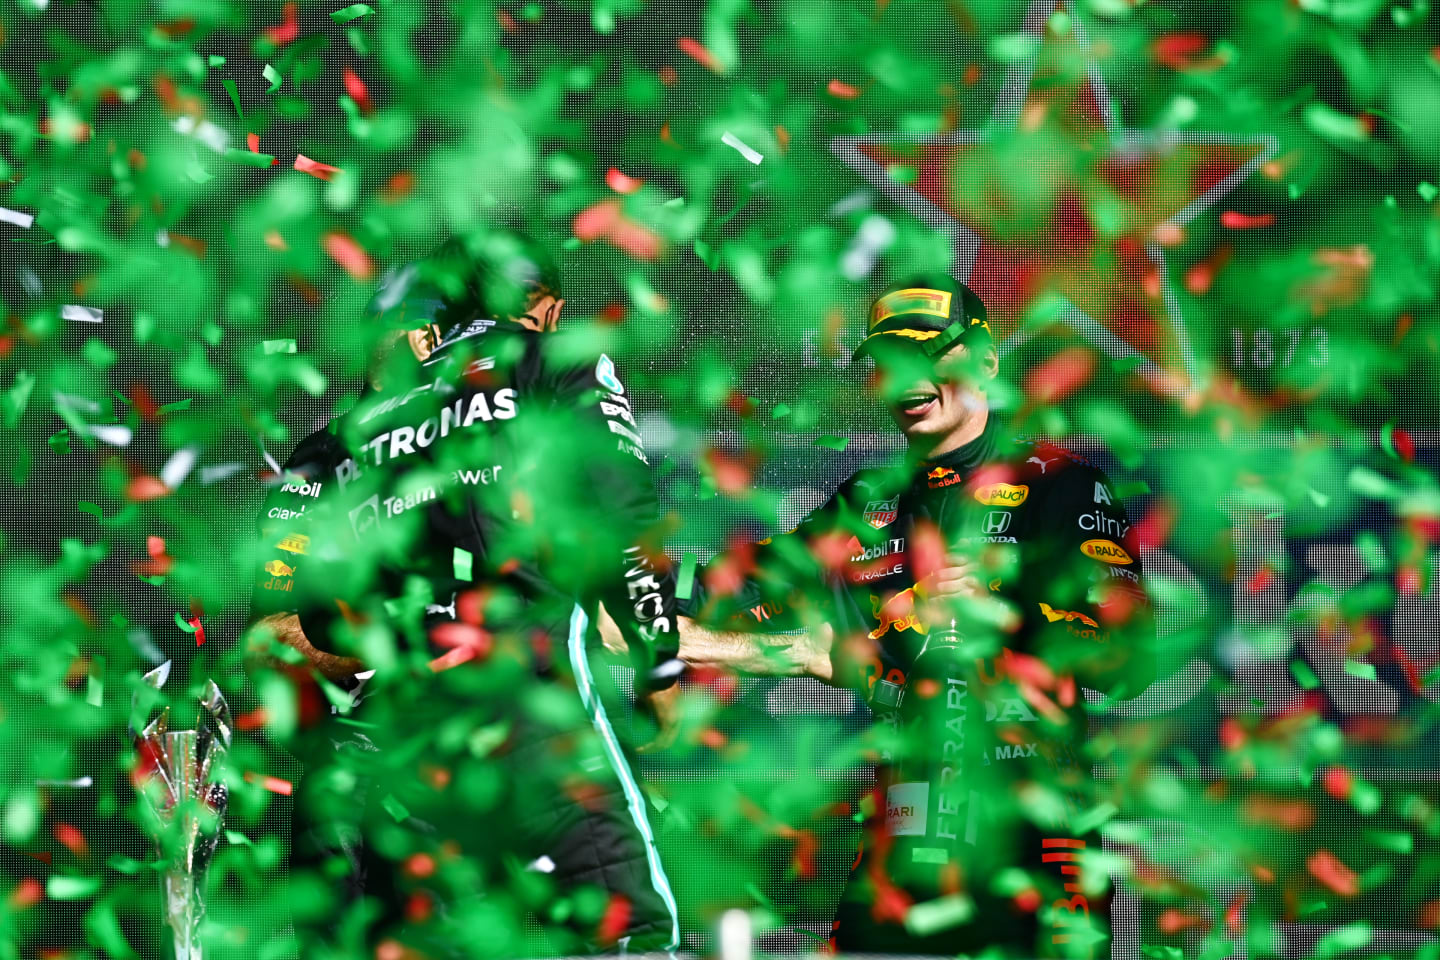 MEXICO CITY, MEXICO - NOVEMBER 07: Second placed Lewis Hamilton of Great Britain and Mercedes GP and third placed Sergio Perez of Mexico and Red Bull Racing celebrate on the podium during the F1 Grand Prix of Mexico at Autodromo Hermanos Rodriguez on November 07, 2021 in Mexico City, Mexico. (Photo by Clive Mason/Getty Images)